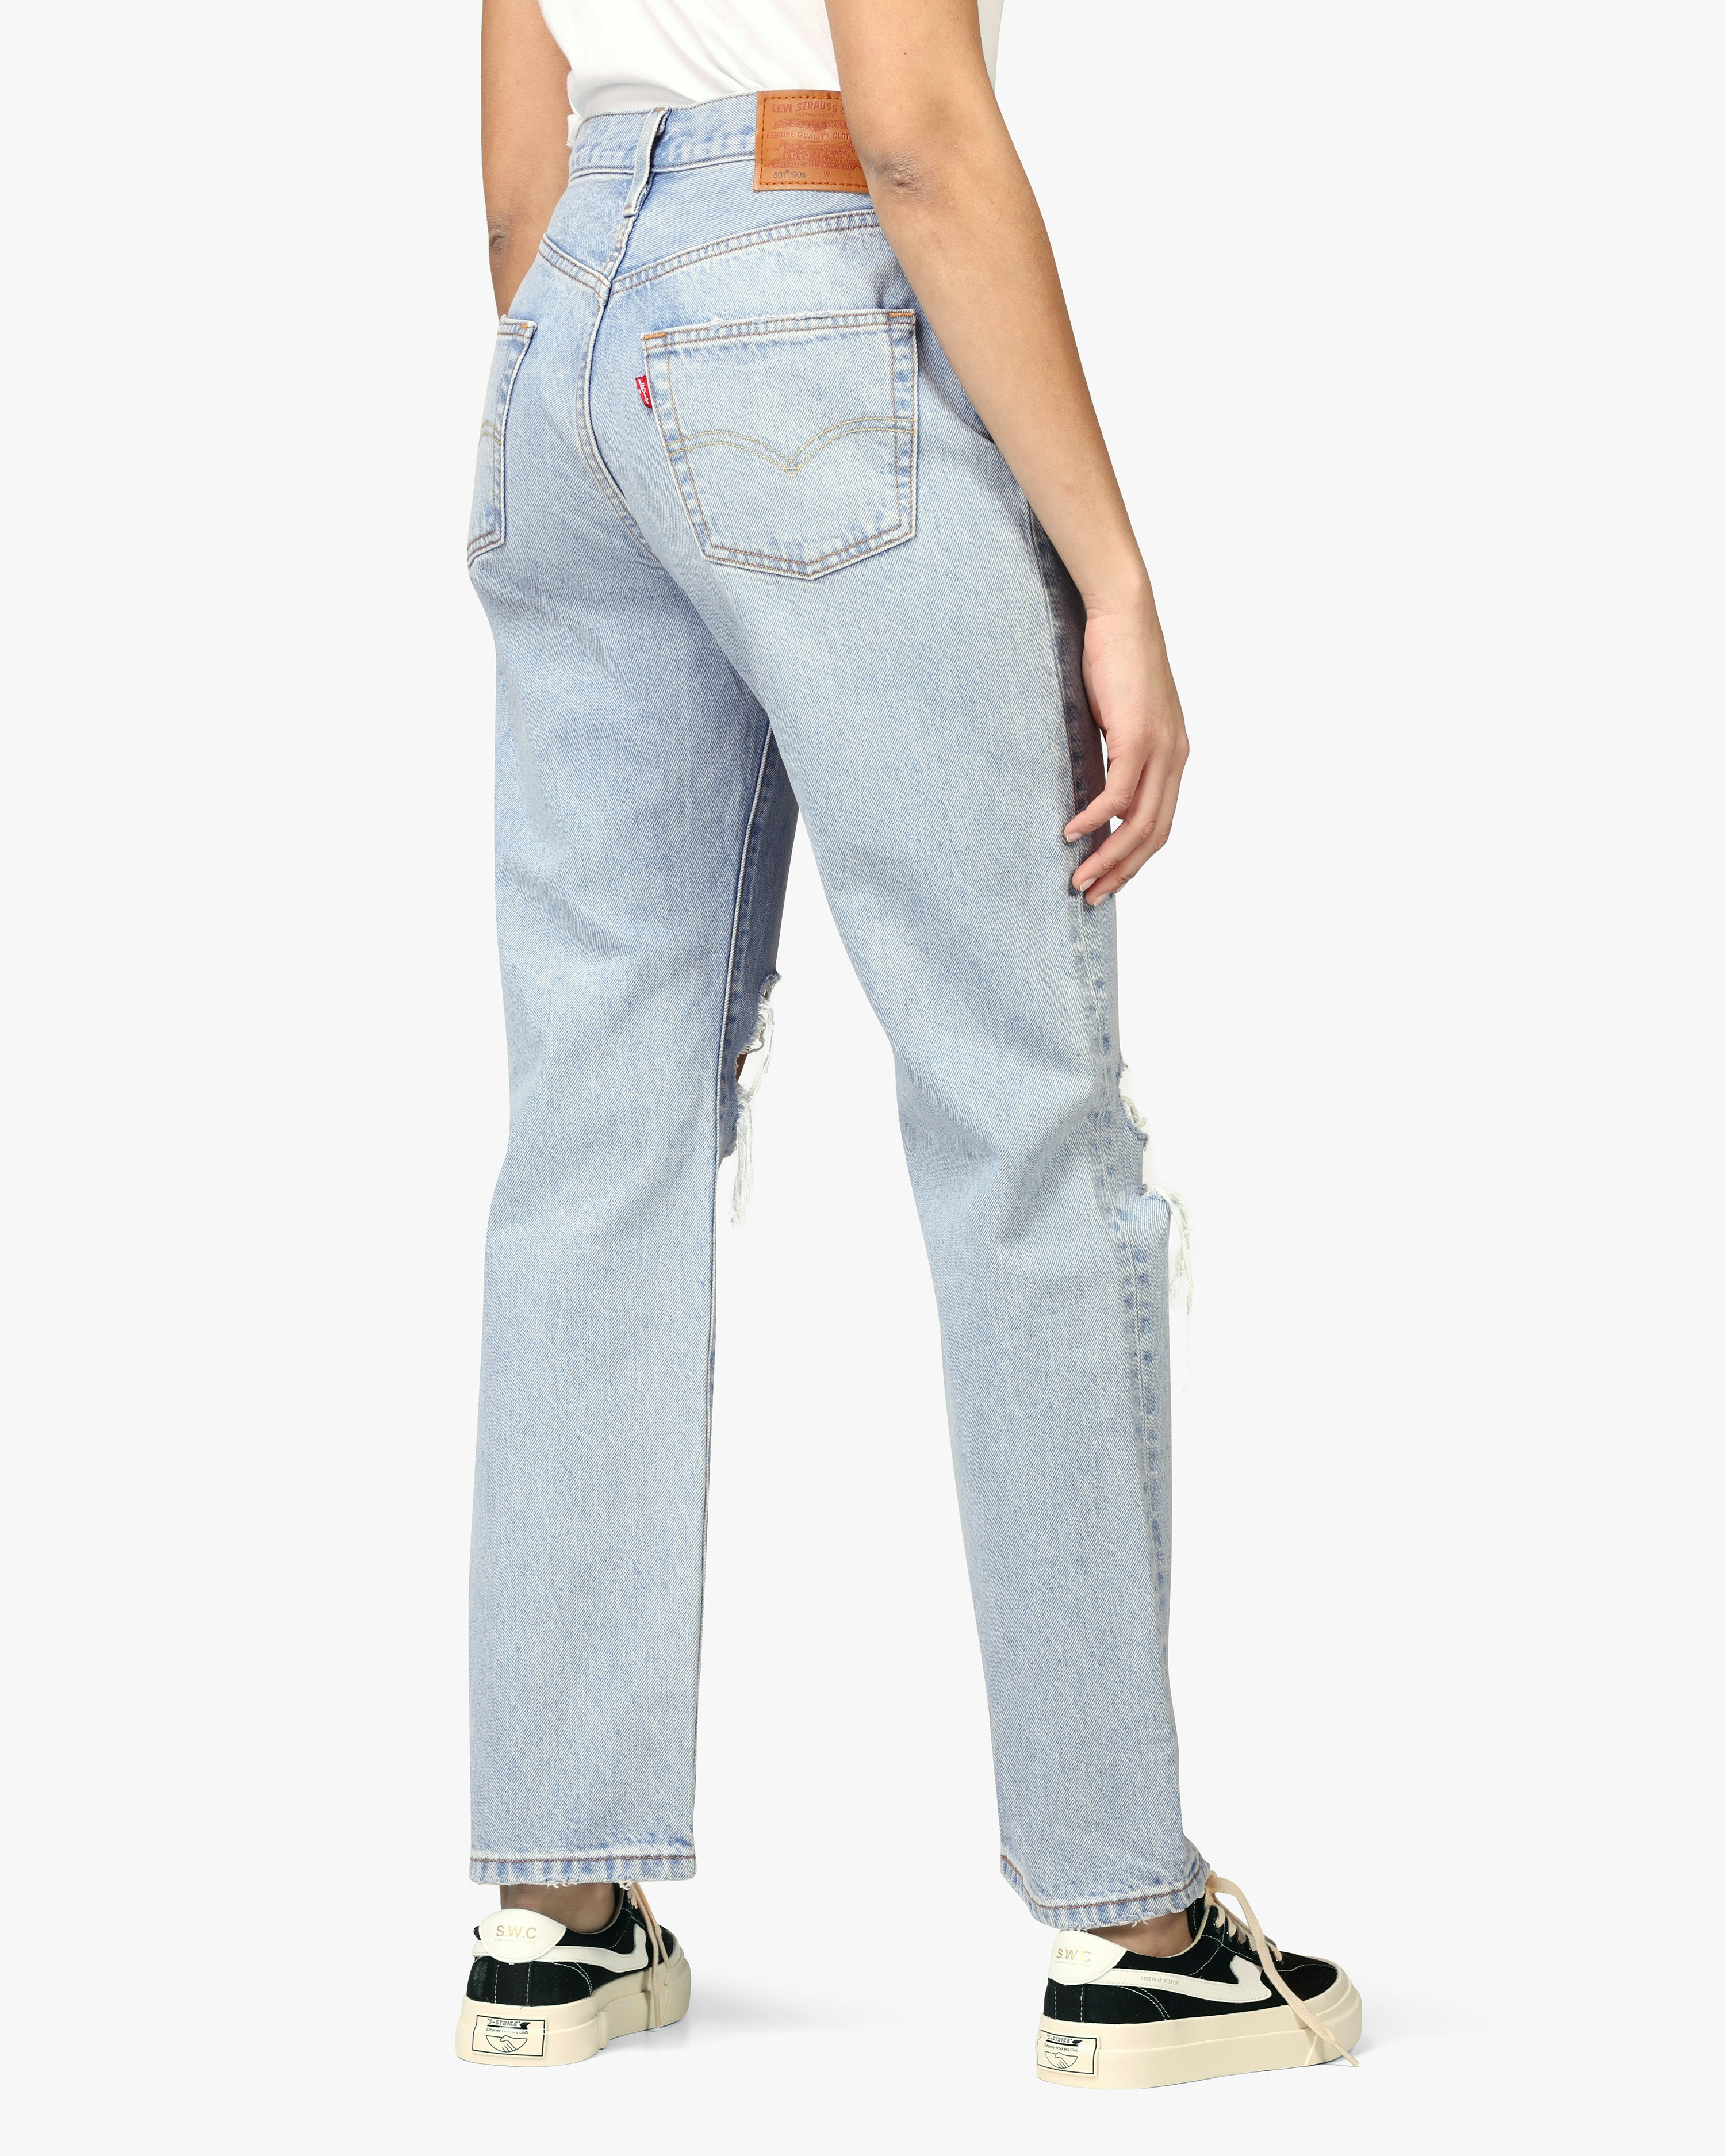 Levi's 501® 90's Light Blue Ripped Jeans | Women | at Carlings.com